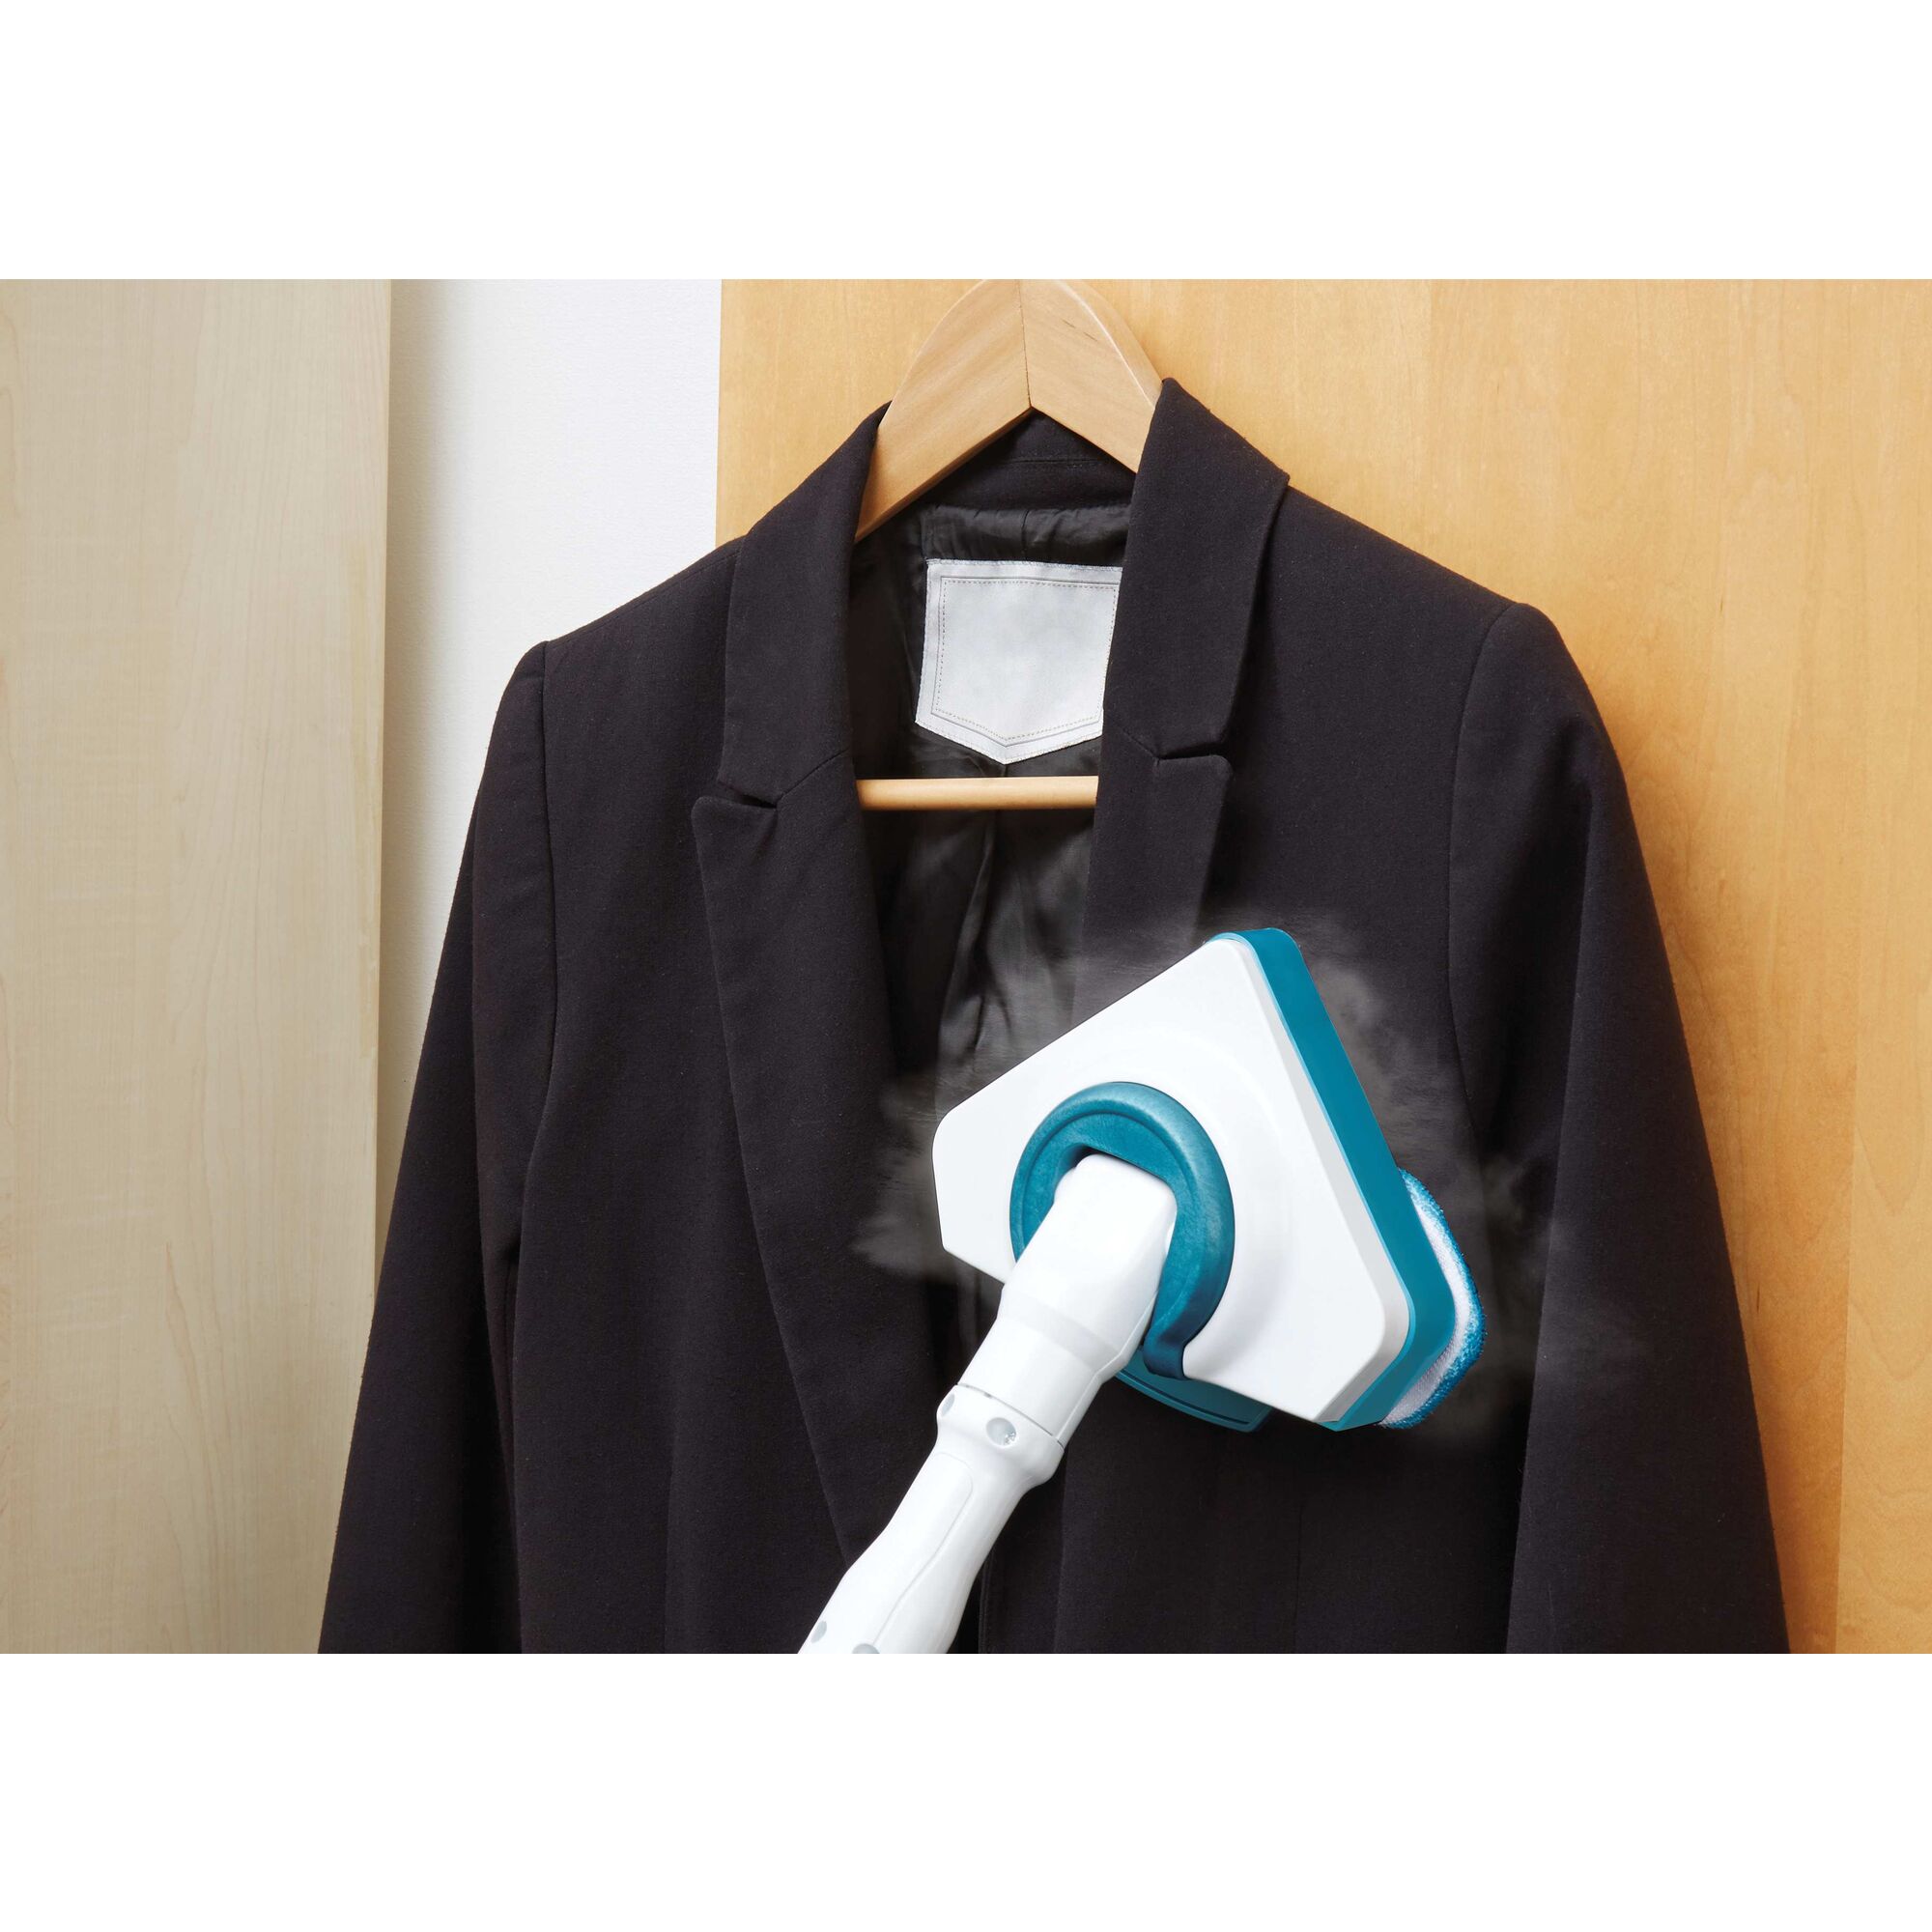 Garment steamer attachment for the steam mop used on a black blazer